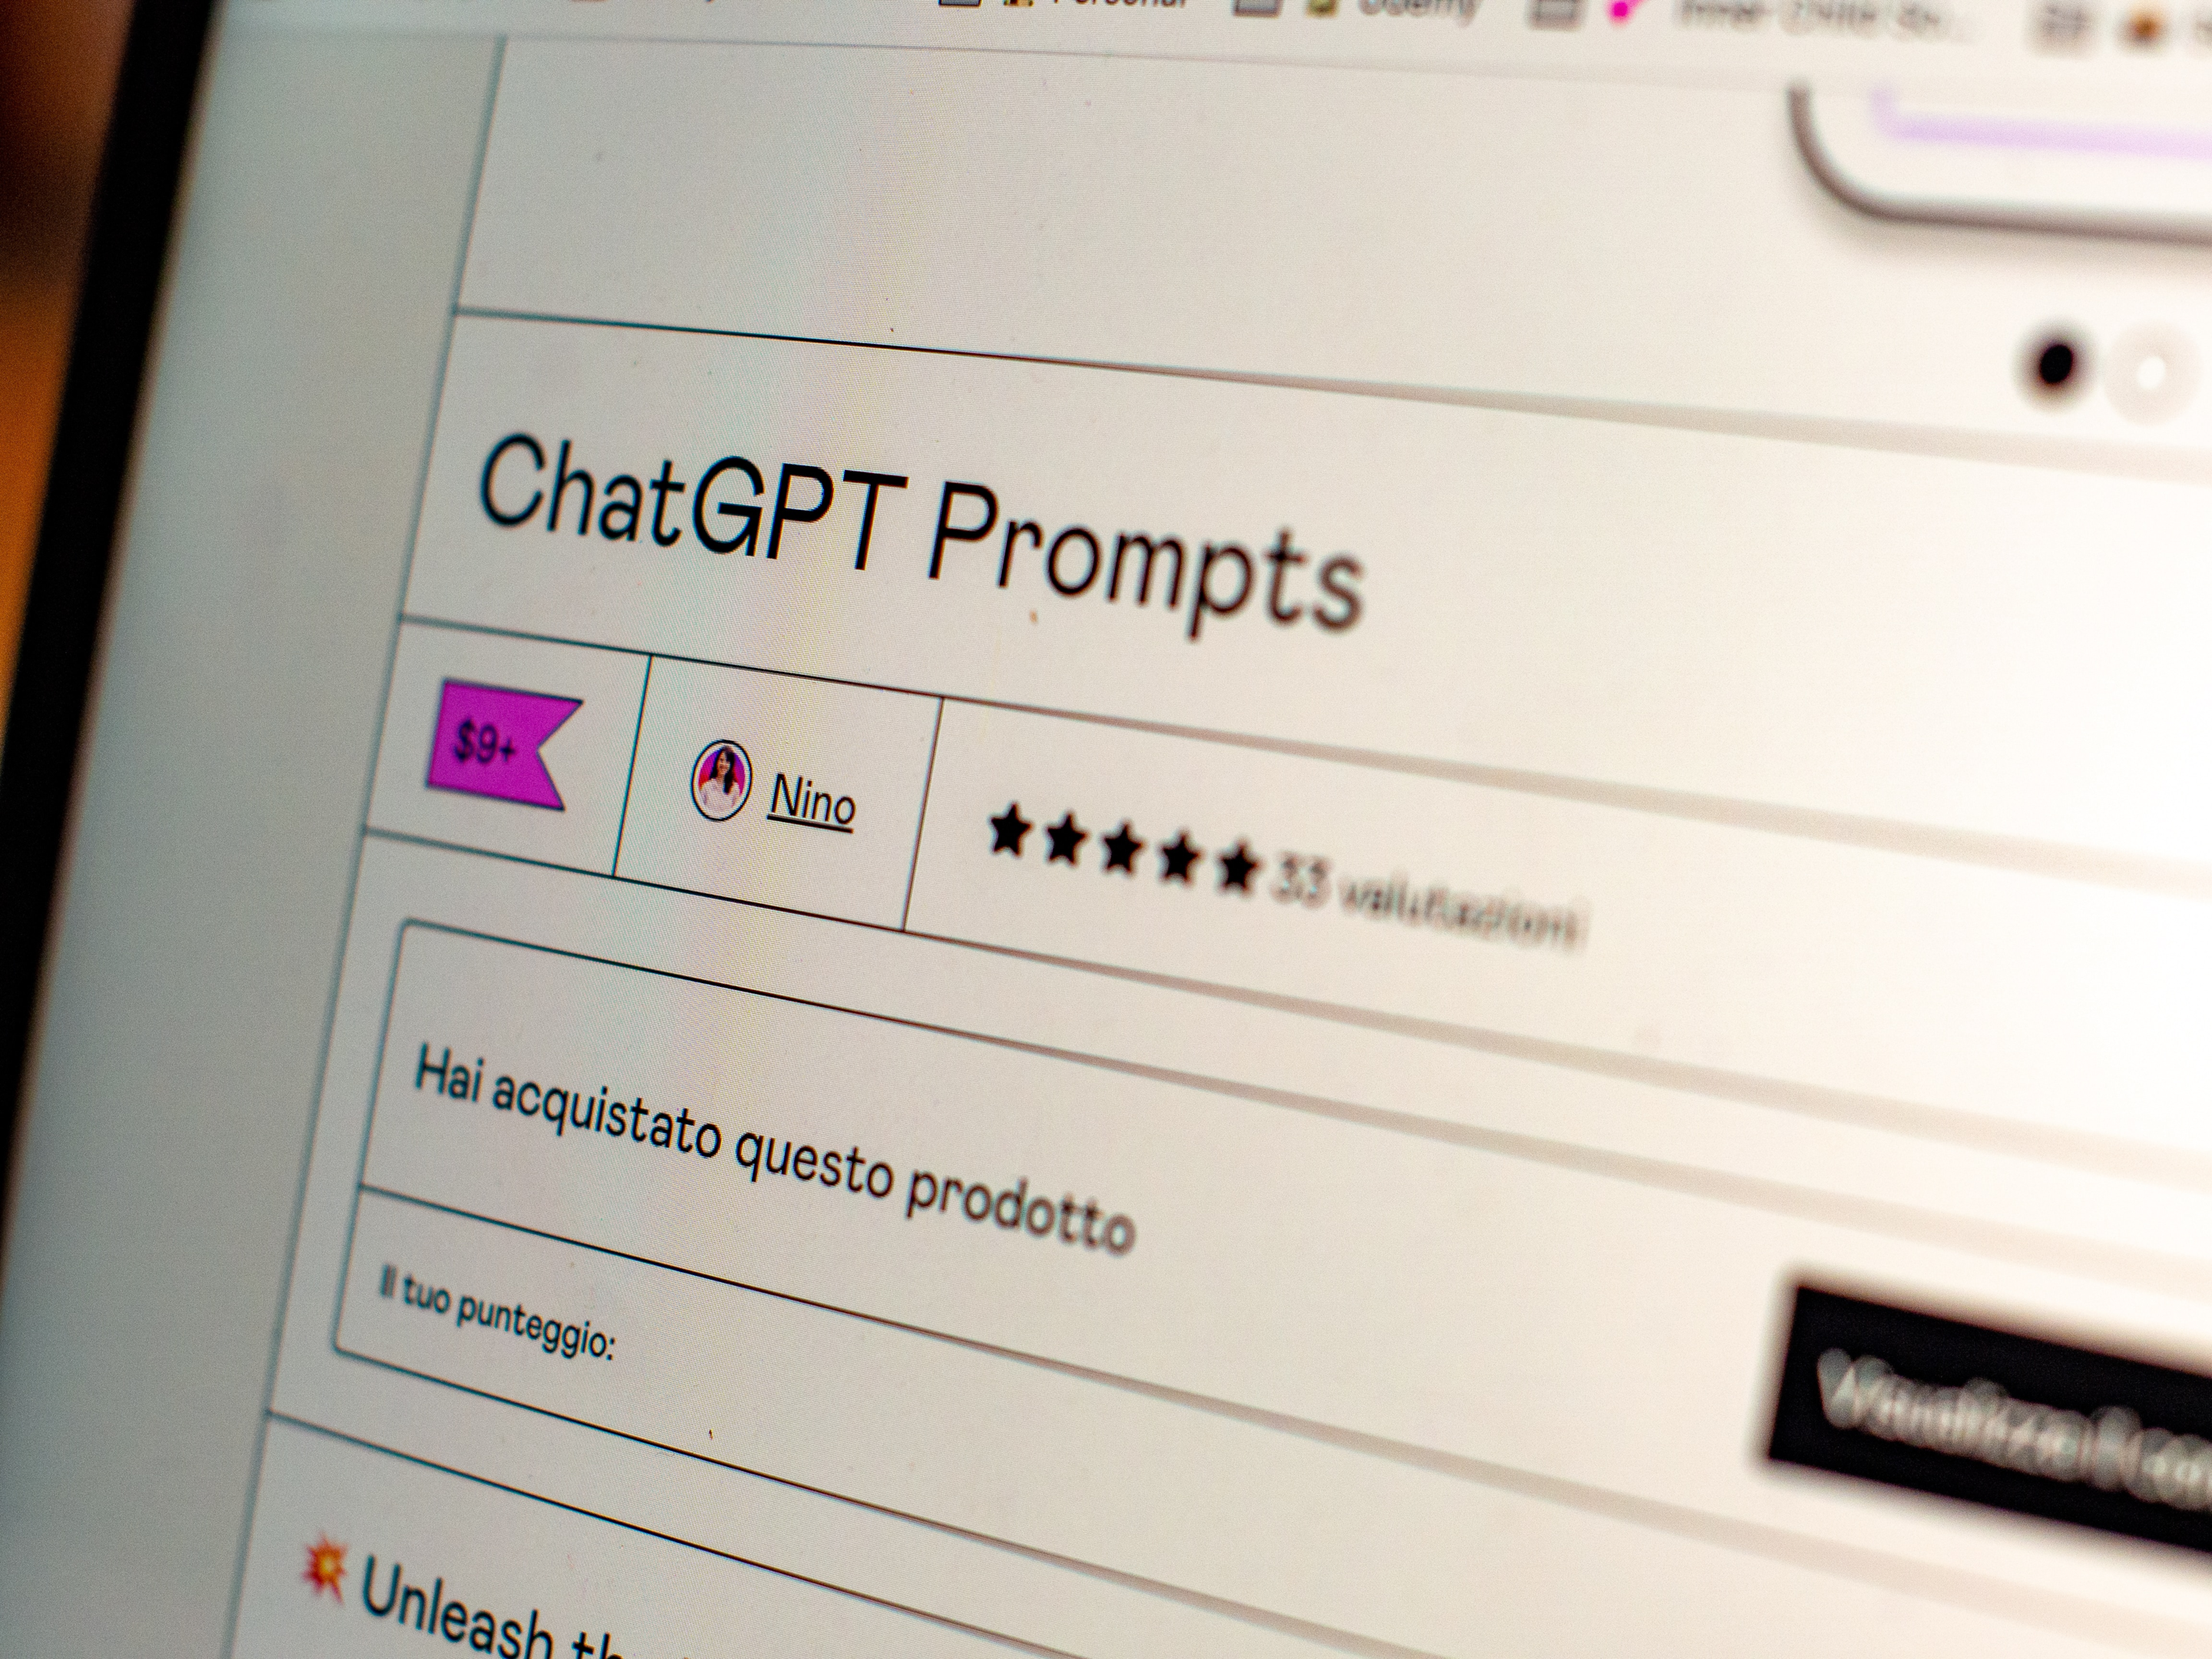 Well-crafted ChatGPT prompts boosts interaction and engagement with ChatGPT